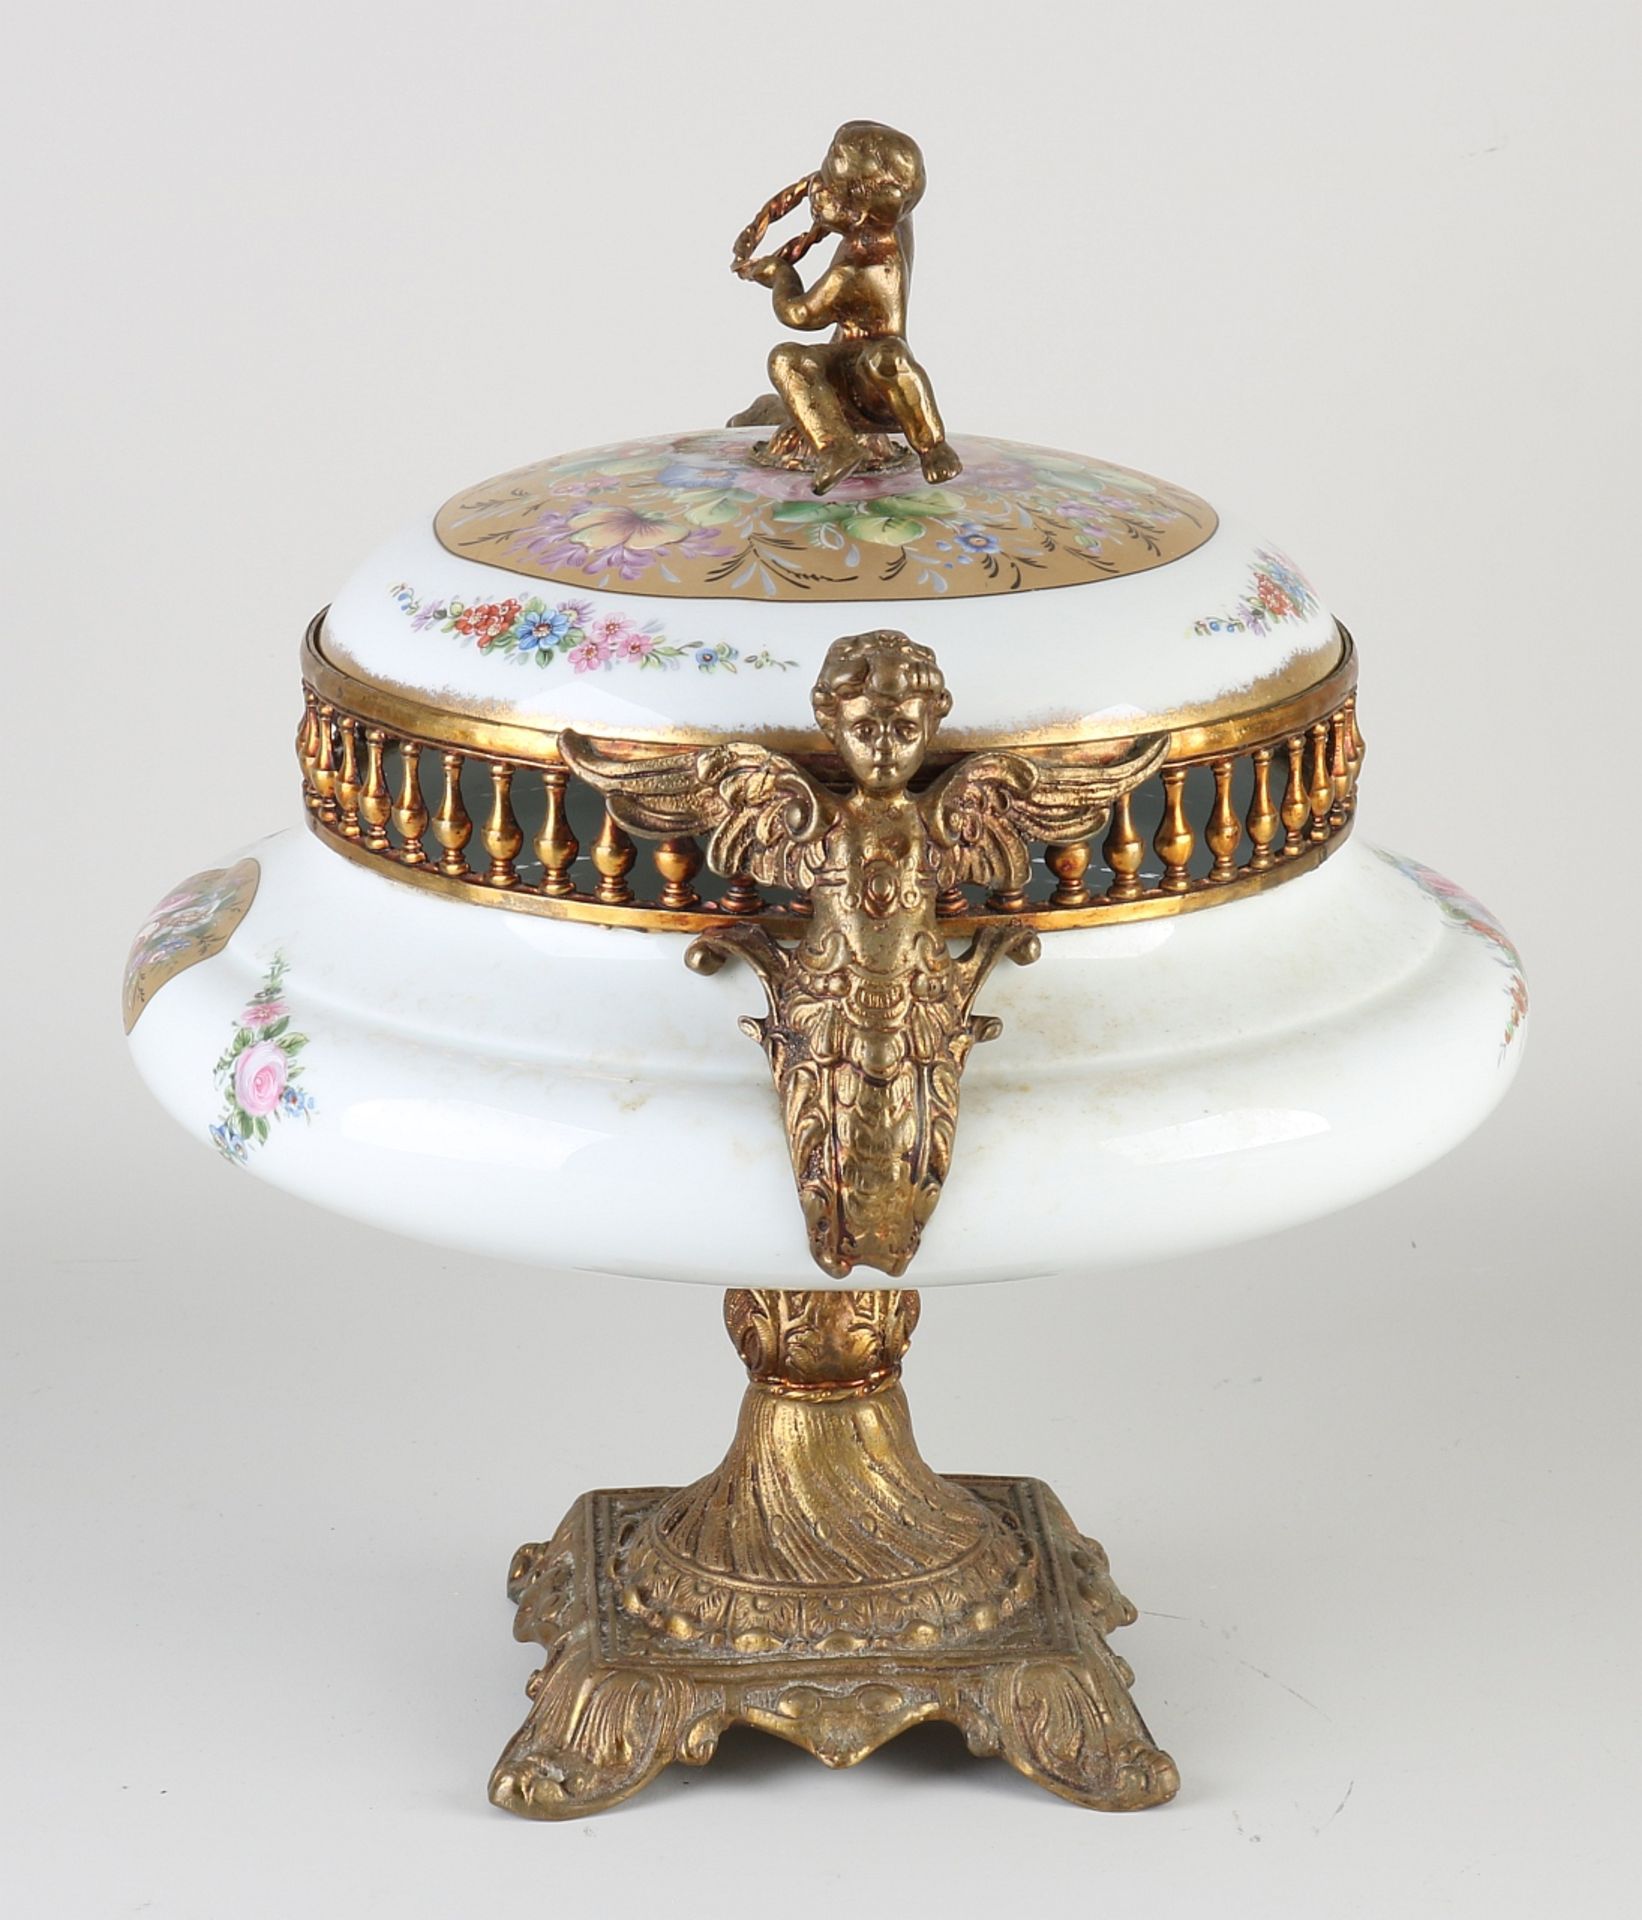 French Limoges vase with lid, H 30 cm. - Image 2 of 2